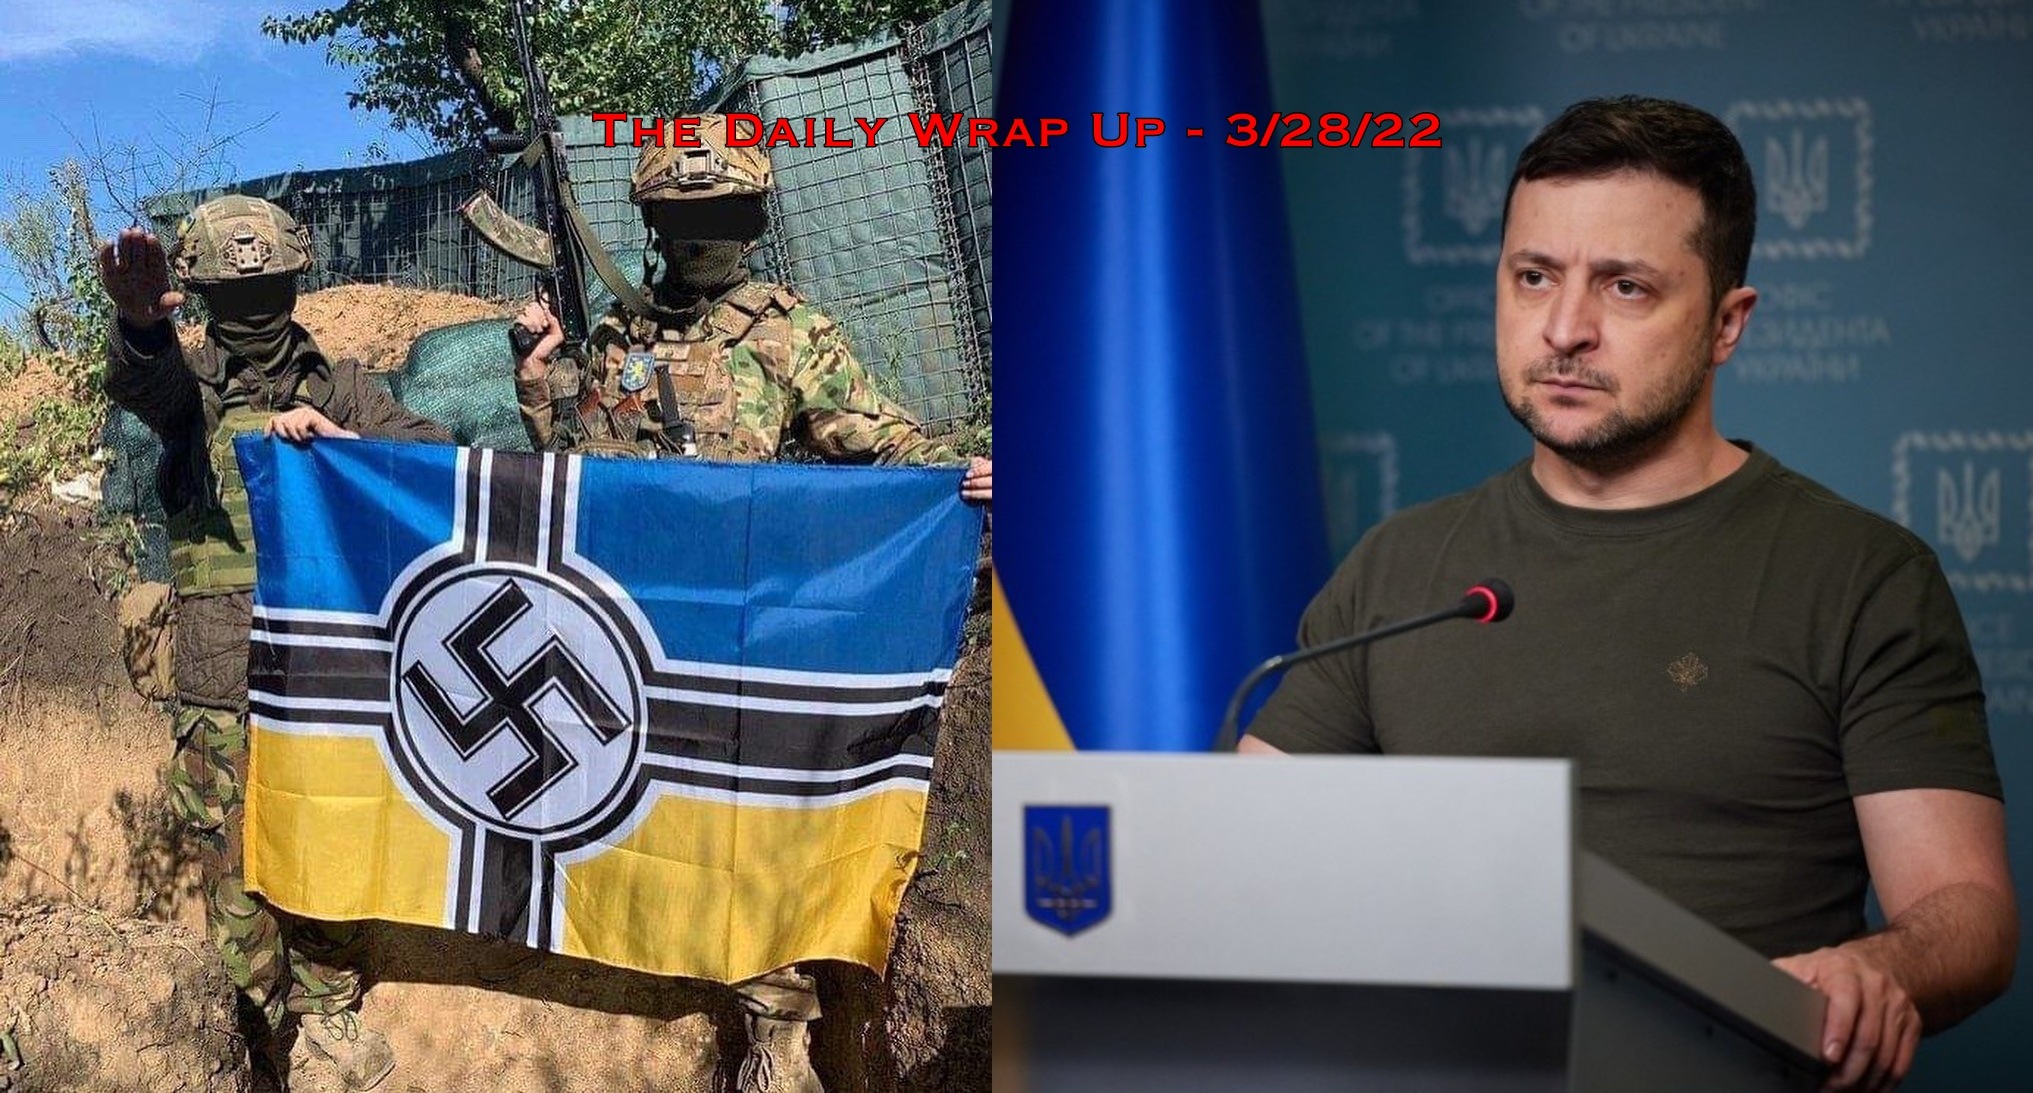 Zelensky Linked To Azov Battalion & Unverified Info From Ukraine Reported Even While Exposed As Fake